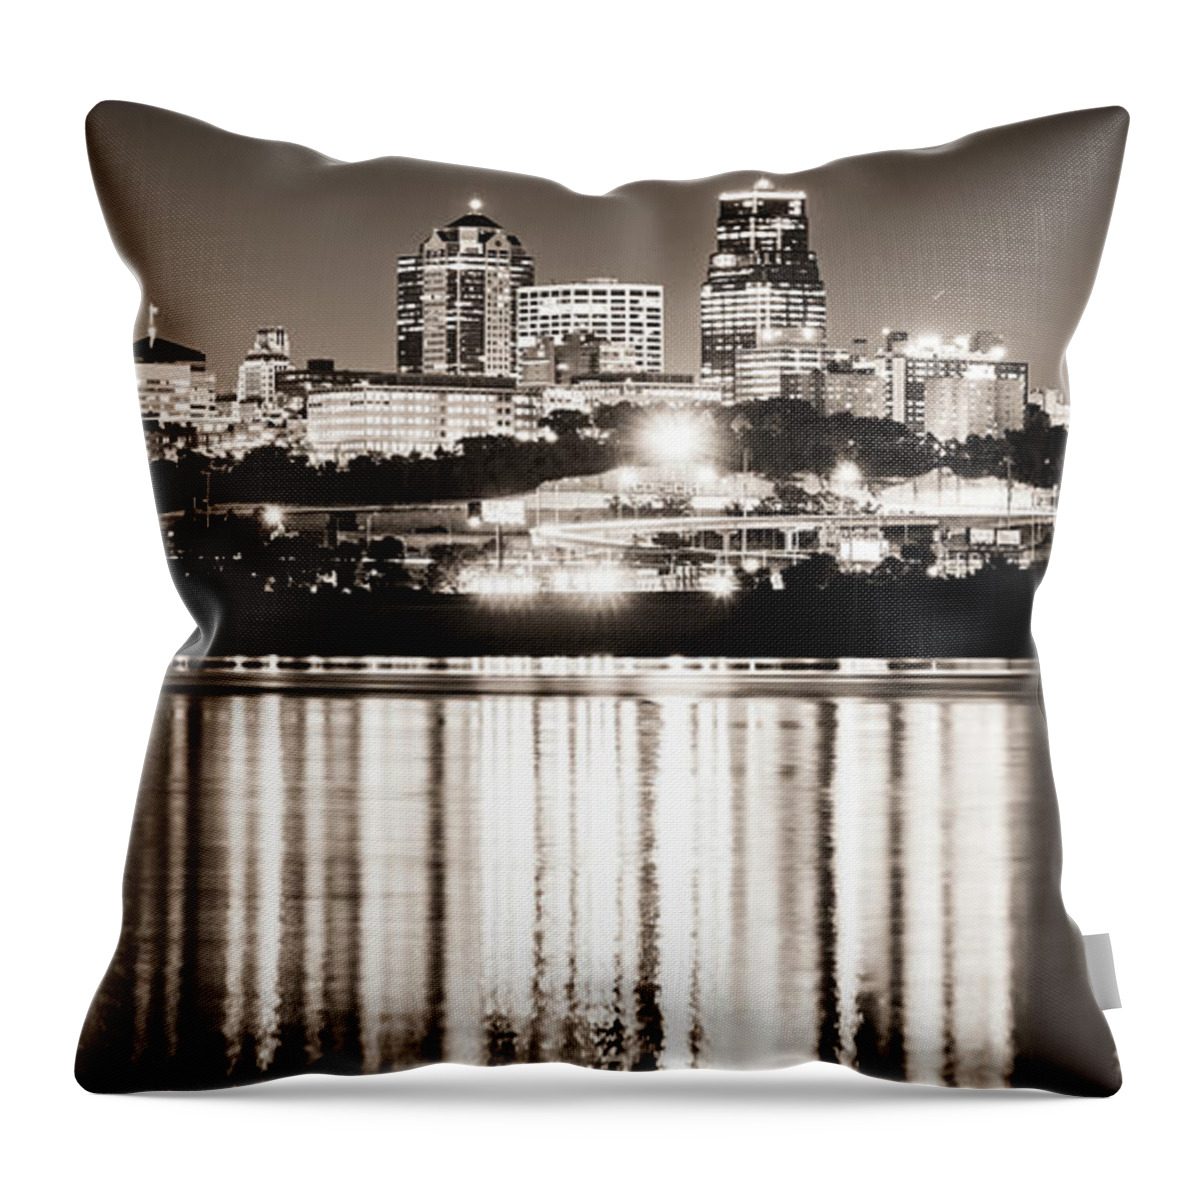 Kc Skyline Throw Pillow featuring the photograph Kansas City Evening Skyline Panorama Over The River - Classic Sepia Edition by Gregory Ballos